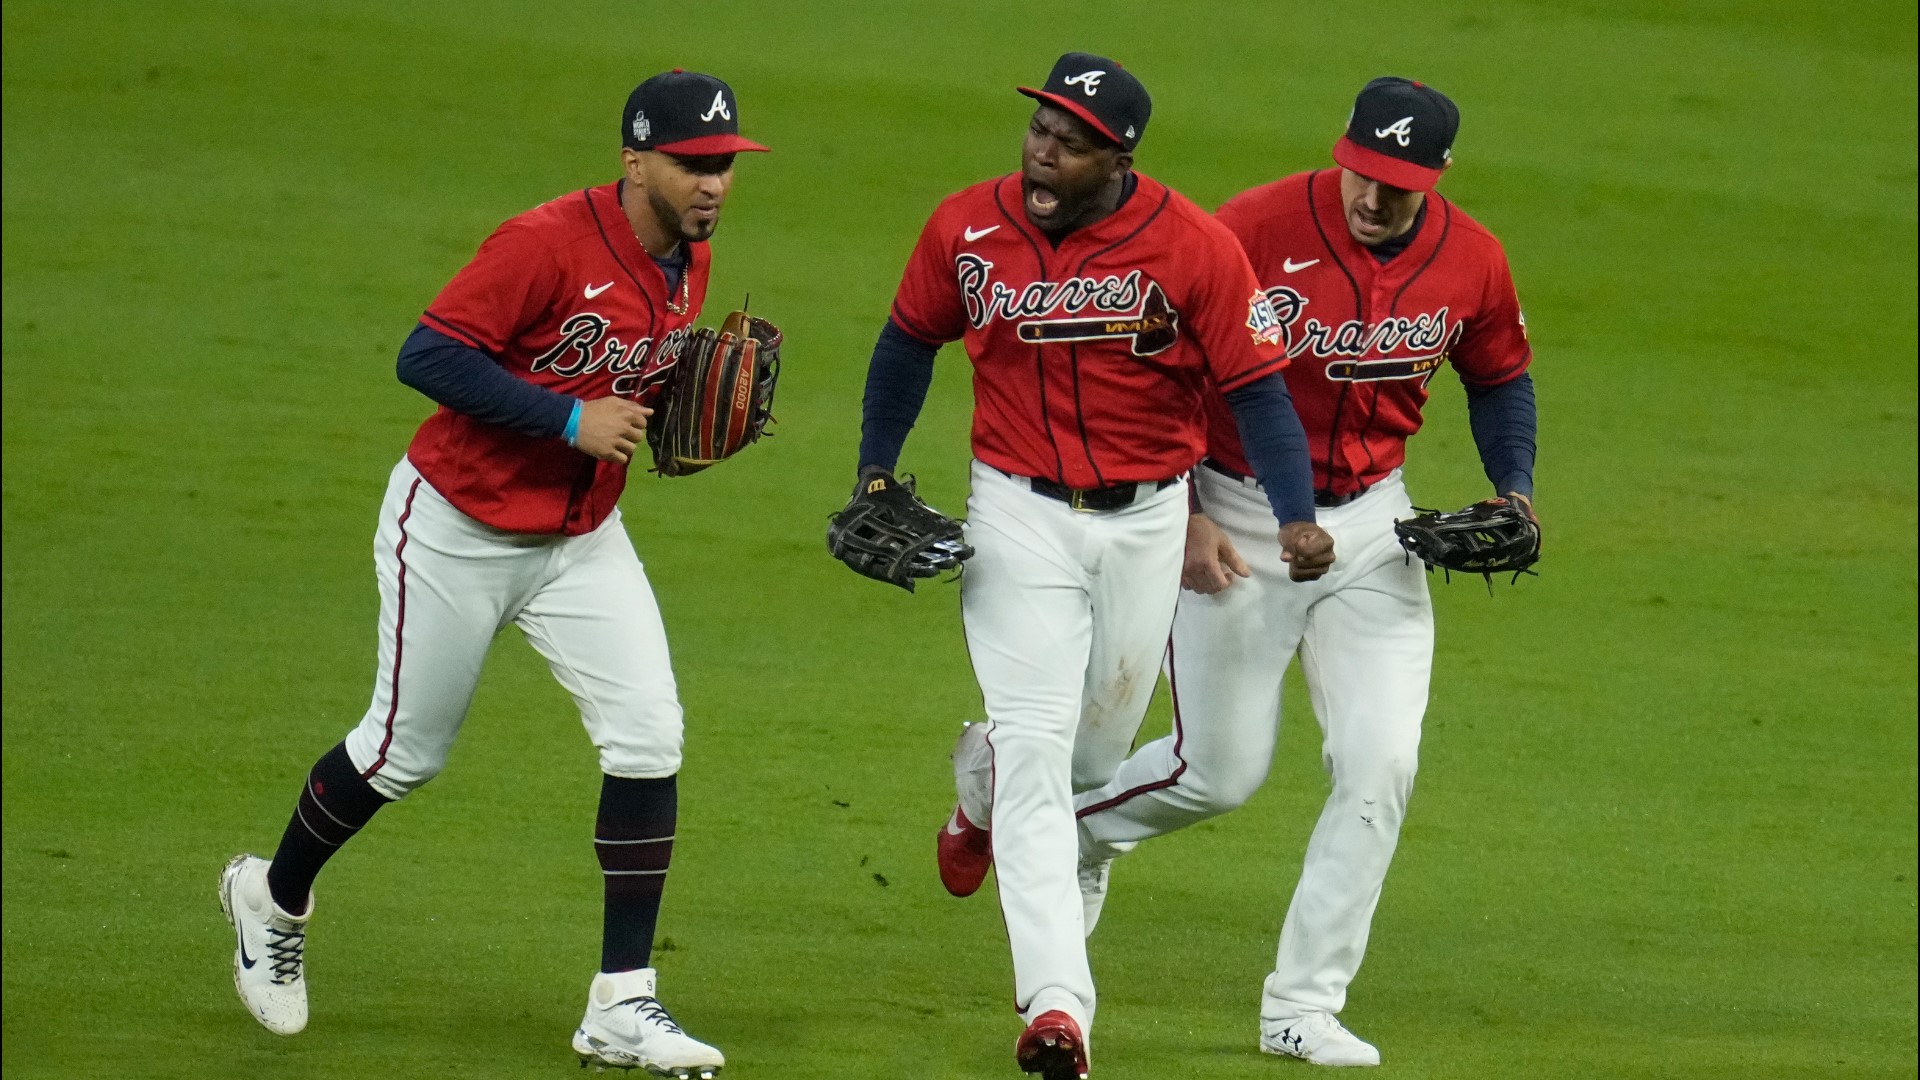 Braves win Game 3 in World Series